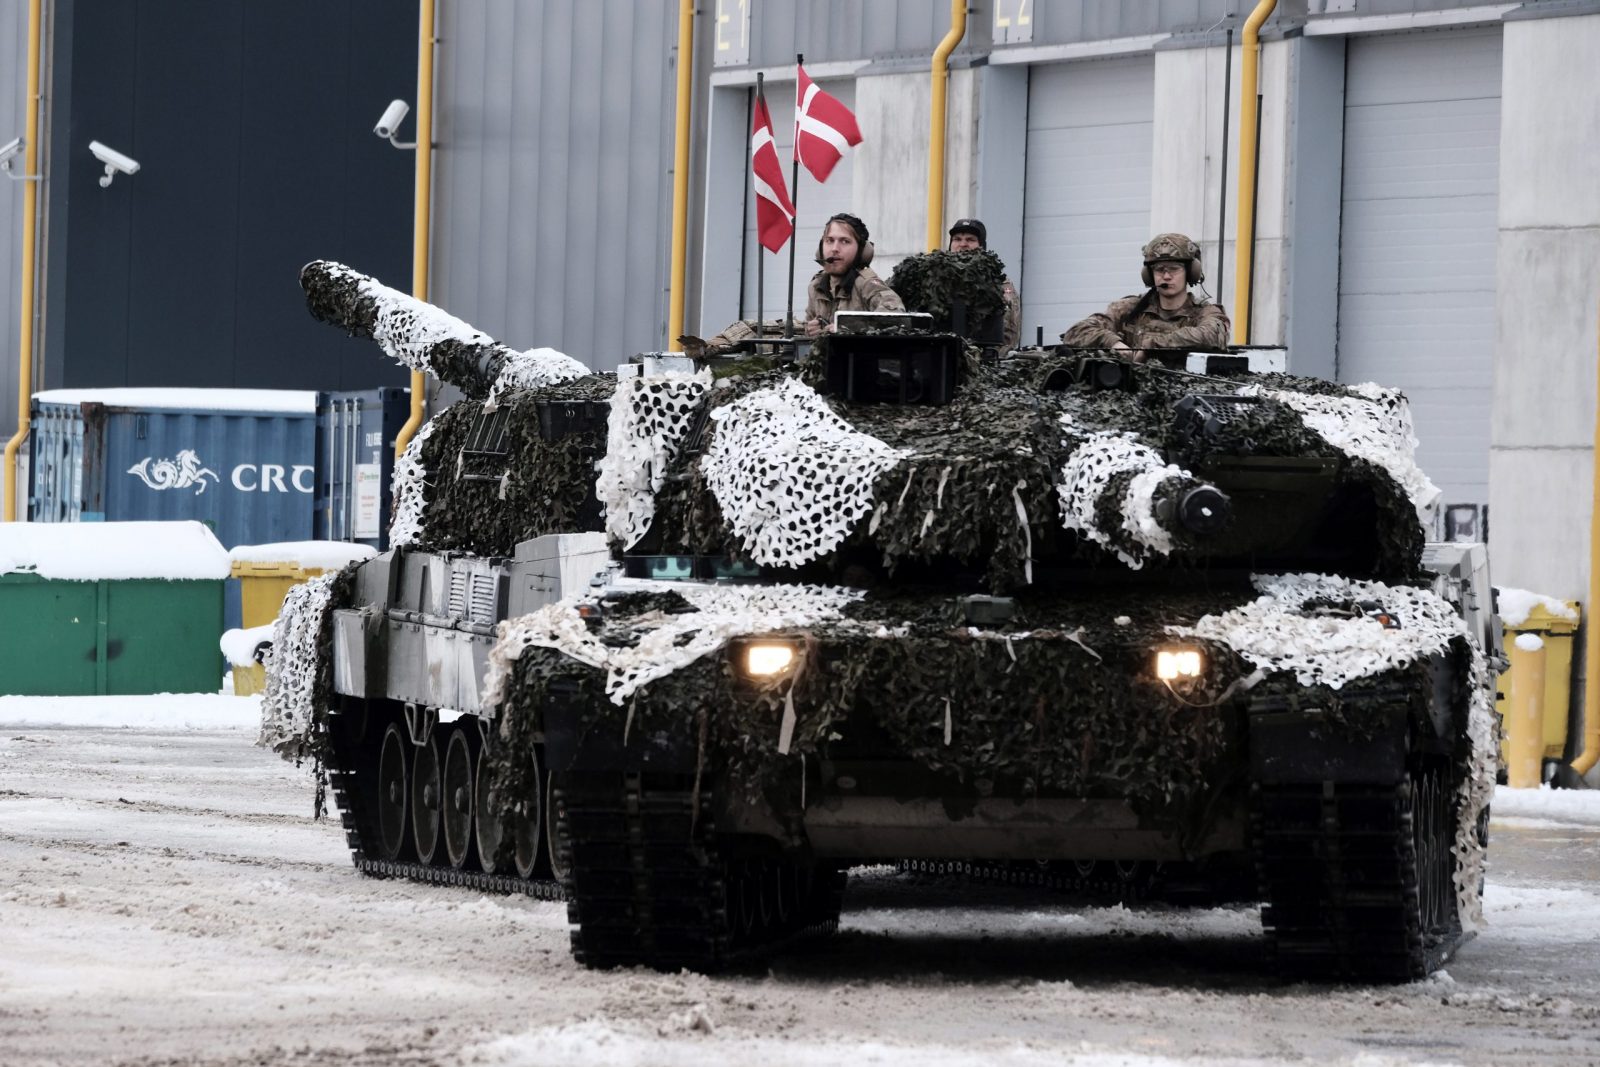 epa10416324 Danish Army serviceman with their main battle tanks Leopard 2 during the Ukraine Military Aid Meeting in Tapa military camp, Estonia, 19 January 2023. British Defense minister attended a meeting on Ukraine military aid at the Tapa Military Camp in Estonia, ahead of the Ramstein format meeting, an international meeting of donors providing military aid to Ukraine took place, where Estonia, the United Kingdom, and several other countries presented their newest aid packages. At an international meeting called together on the initiative of Estonia and the United Kingdom, participating states presented their newest military aid packages for Ukraine, which also include a significant amount of heavy weapons.  EPA/VALDA KALNINA